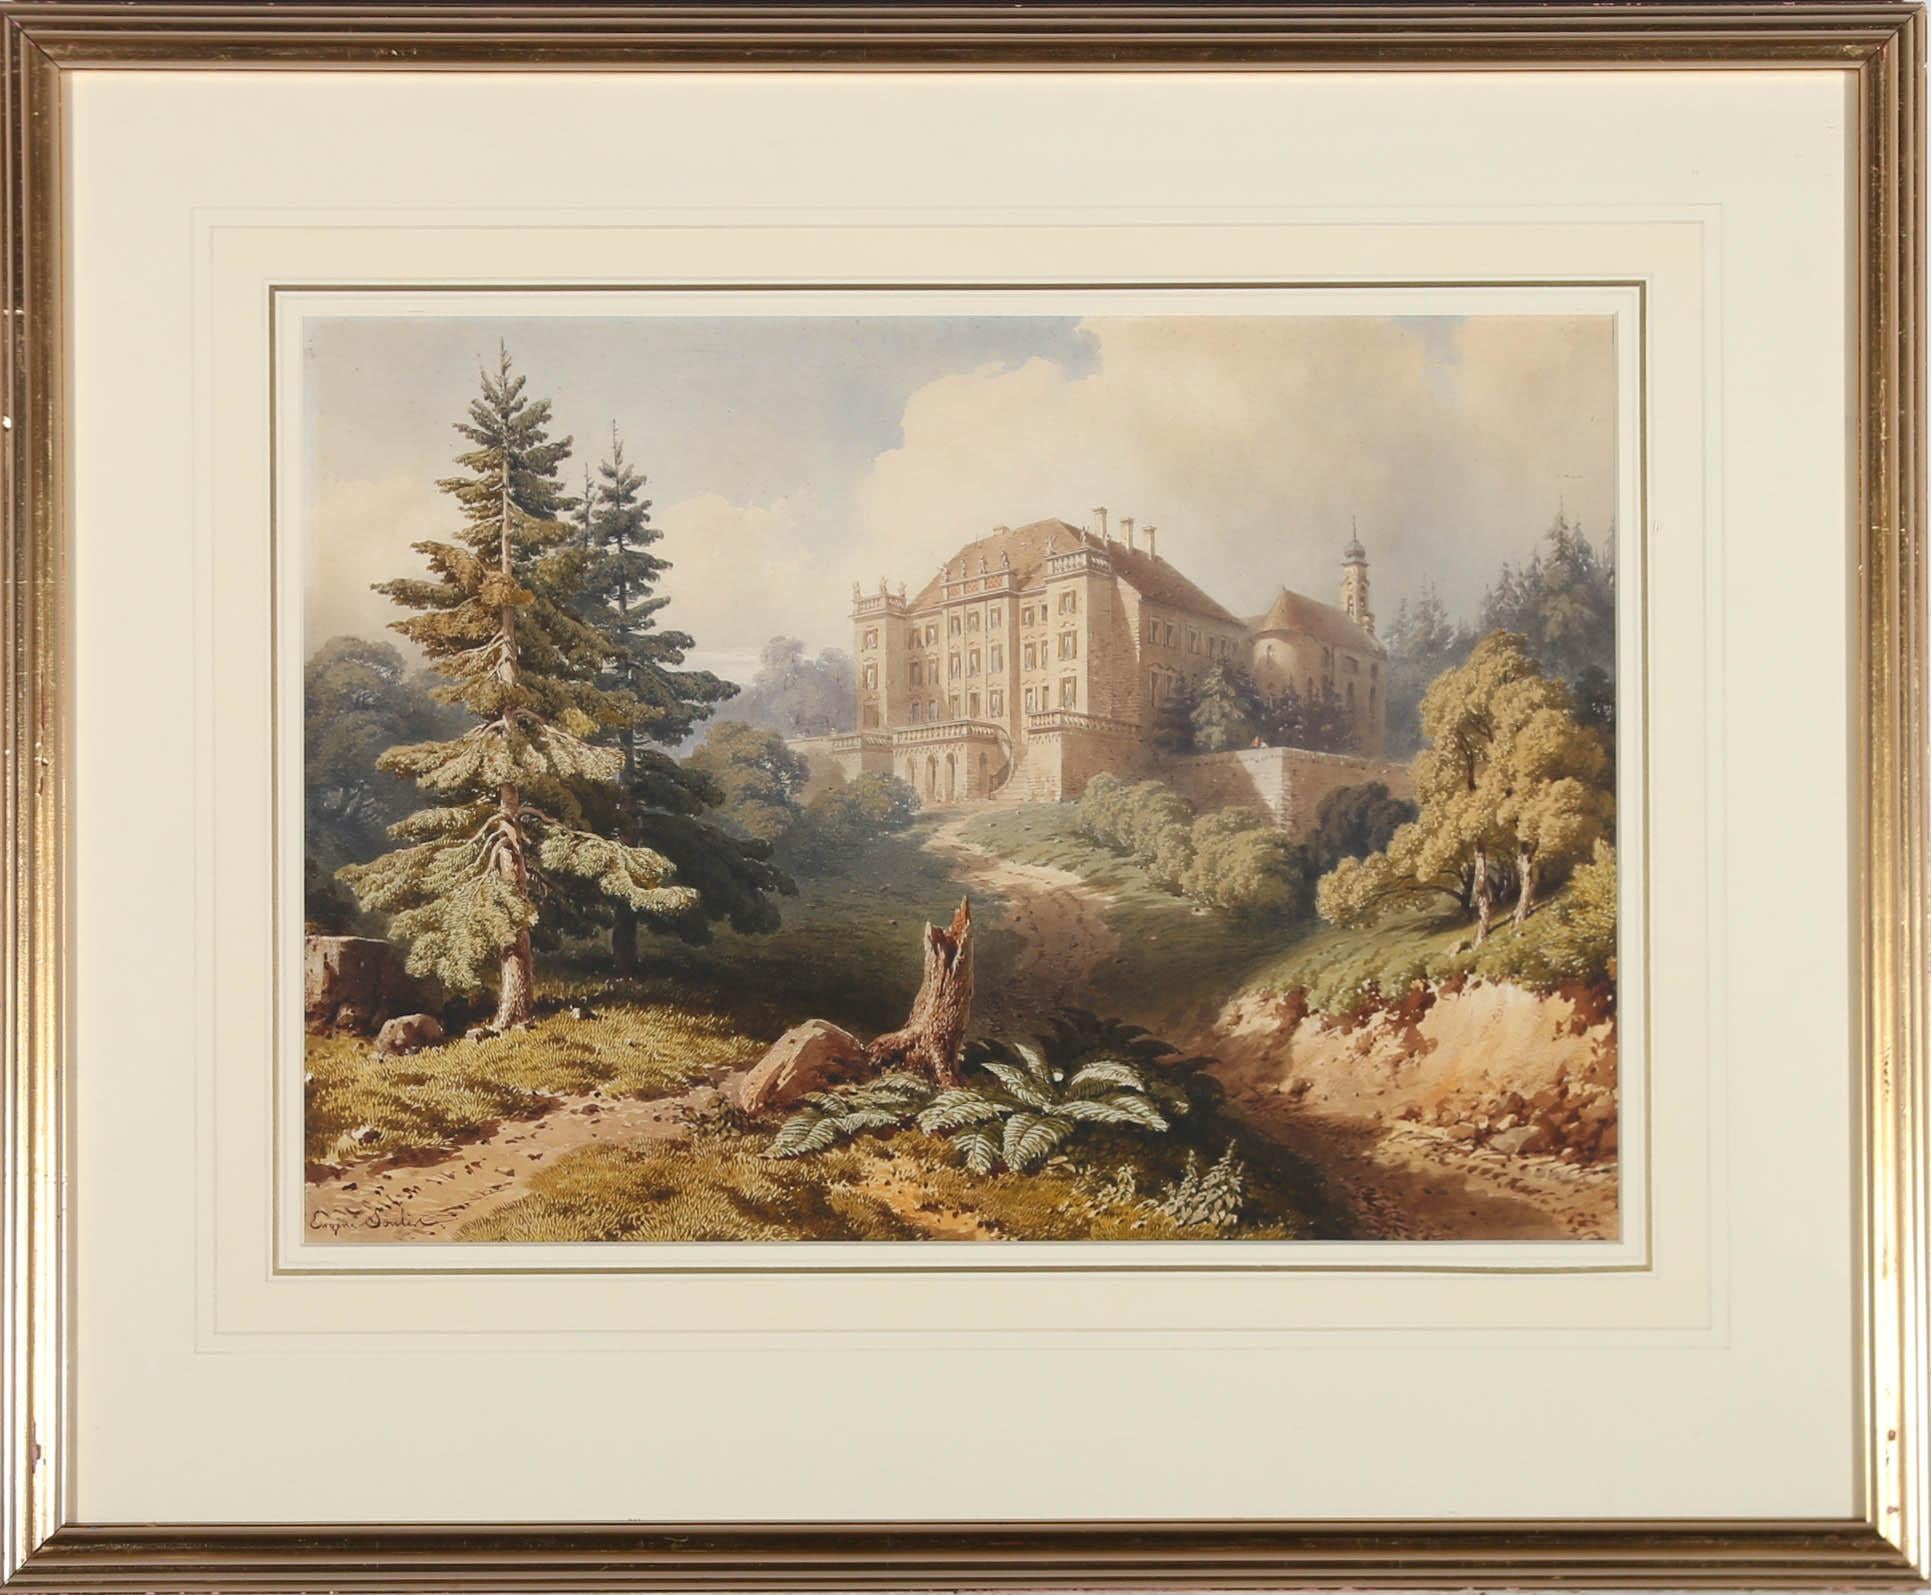 A striking early 19th Century watercolour view of the impressive Château de Kirchberg in Germany. The scene shows the castle nestled in rocky, verdant grounds with forests all around. Sun pours down onto the facade and two figures can be seen on a